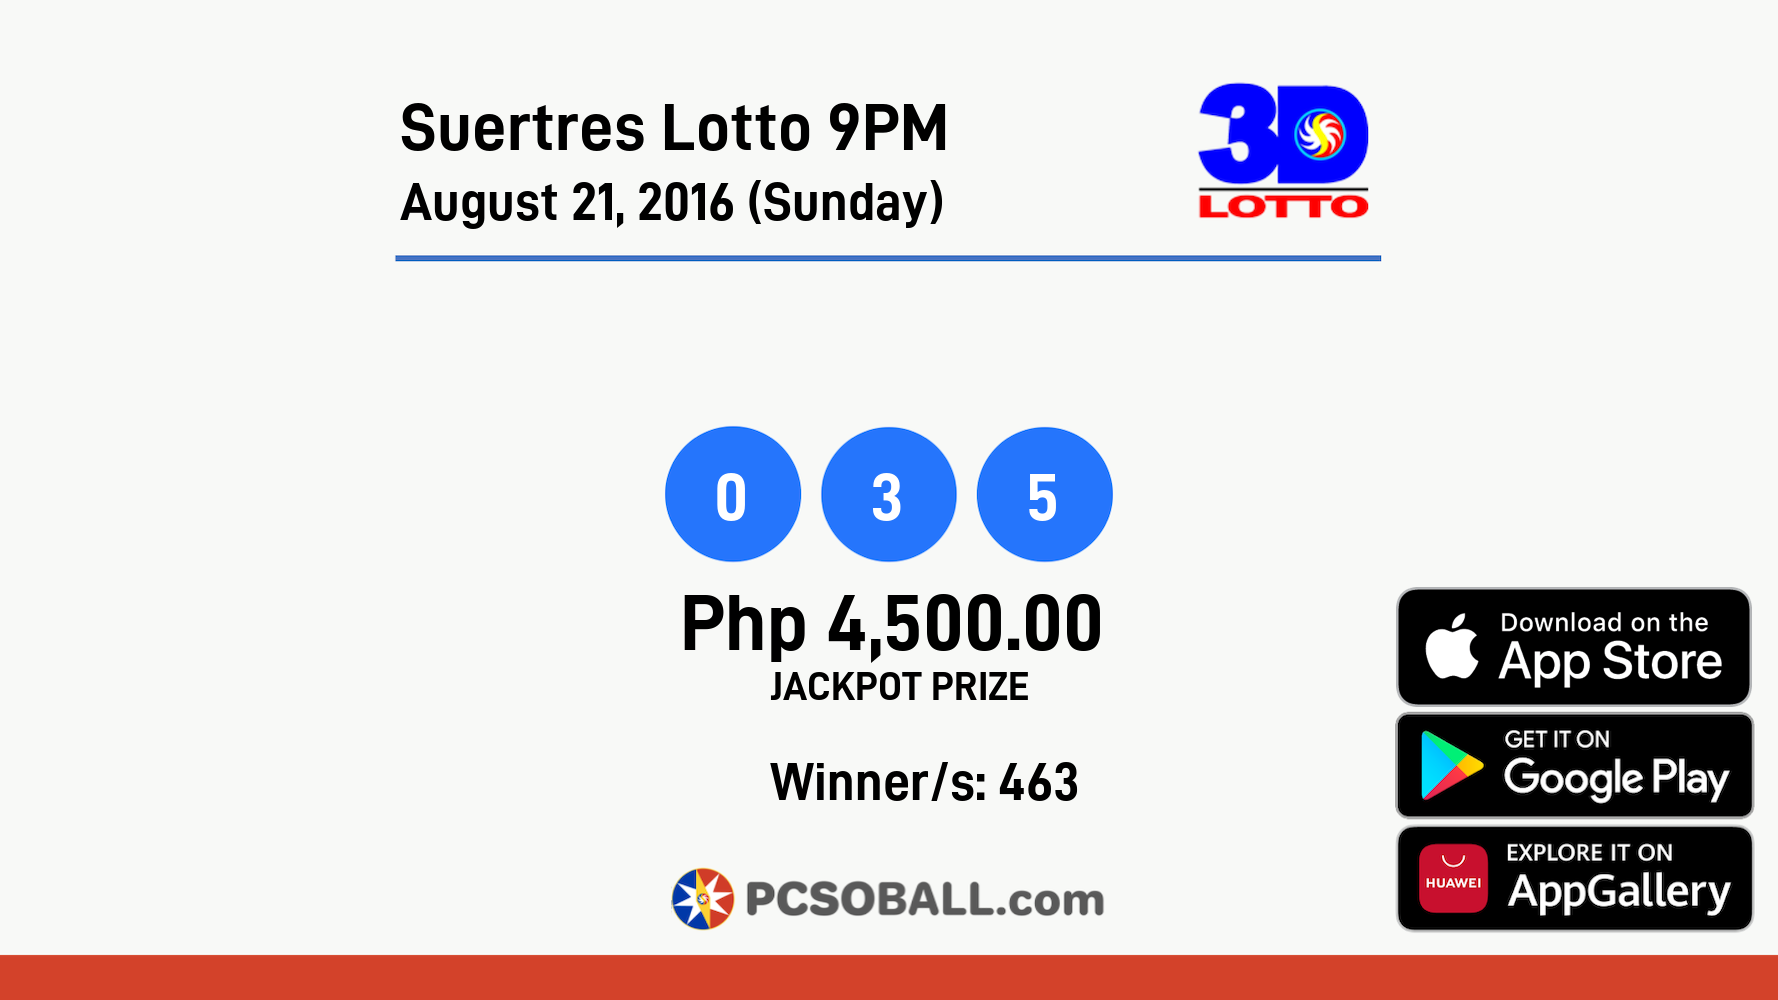 Suertres Lotto 9PM August 21, 2016 (Sunday) Result